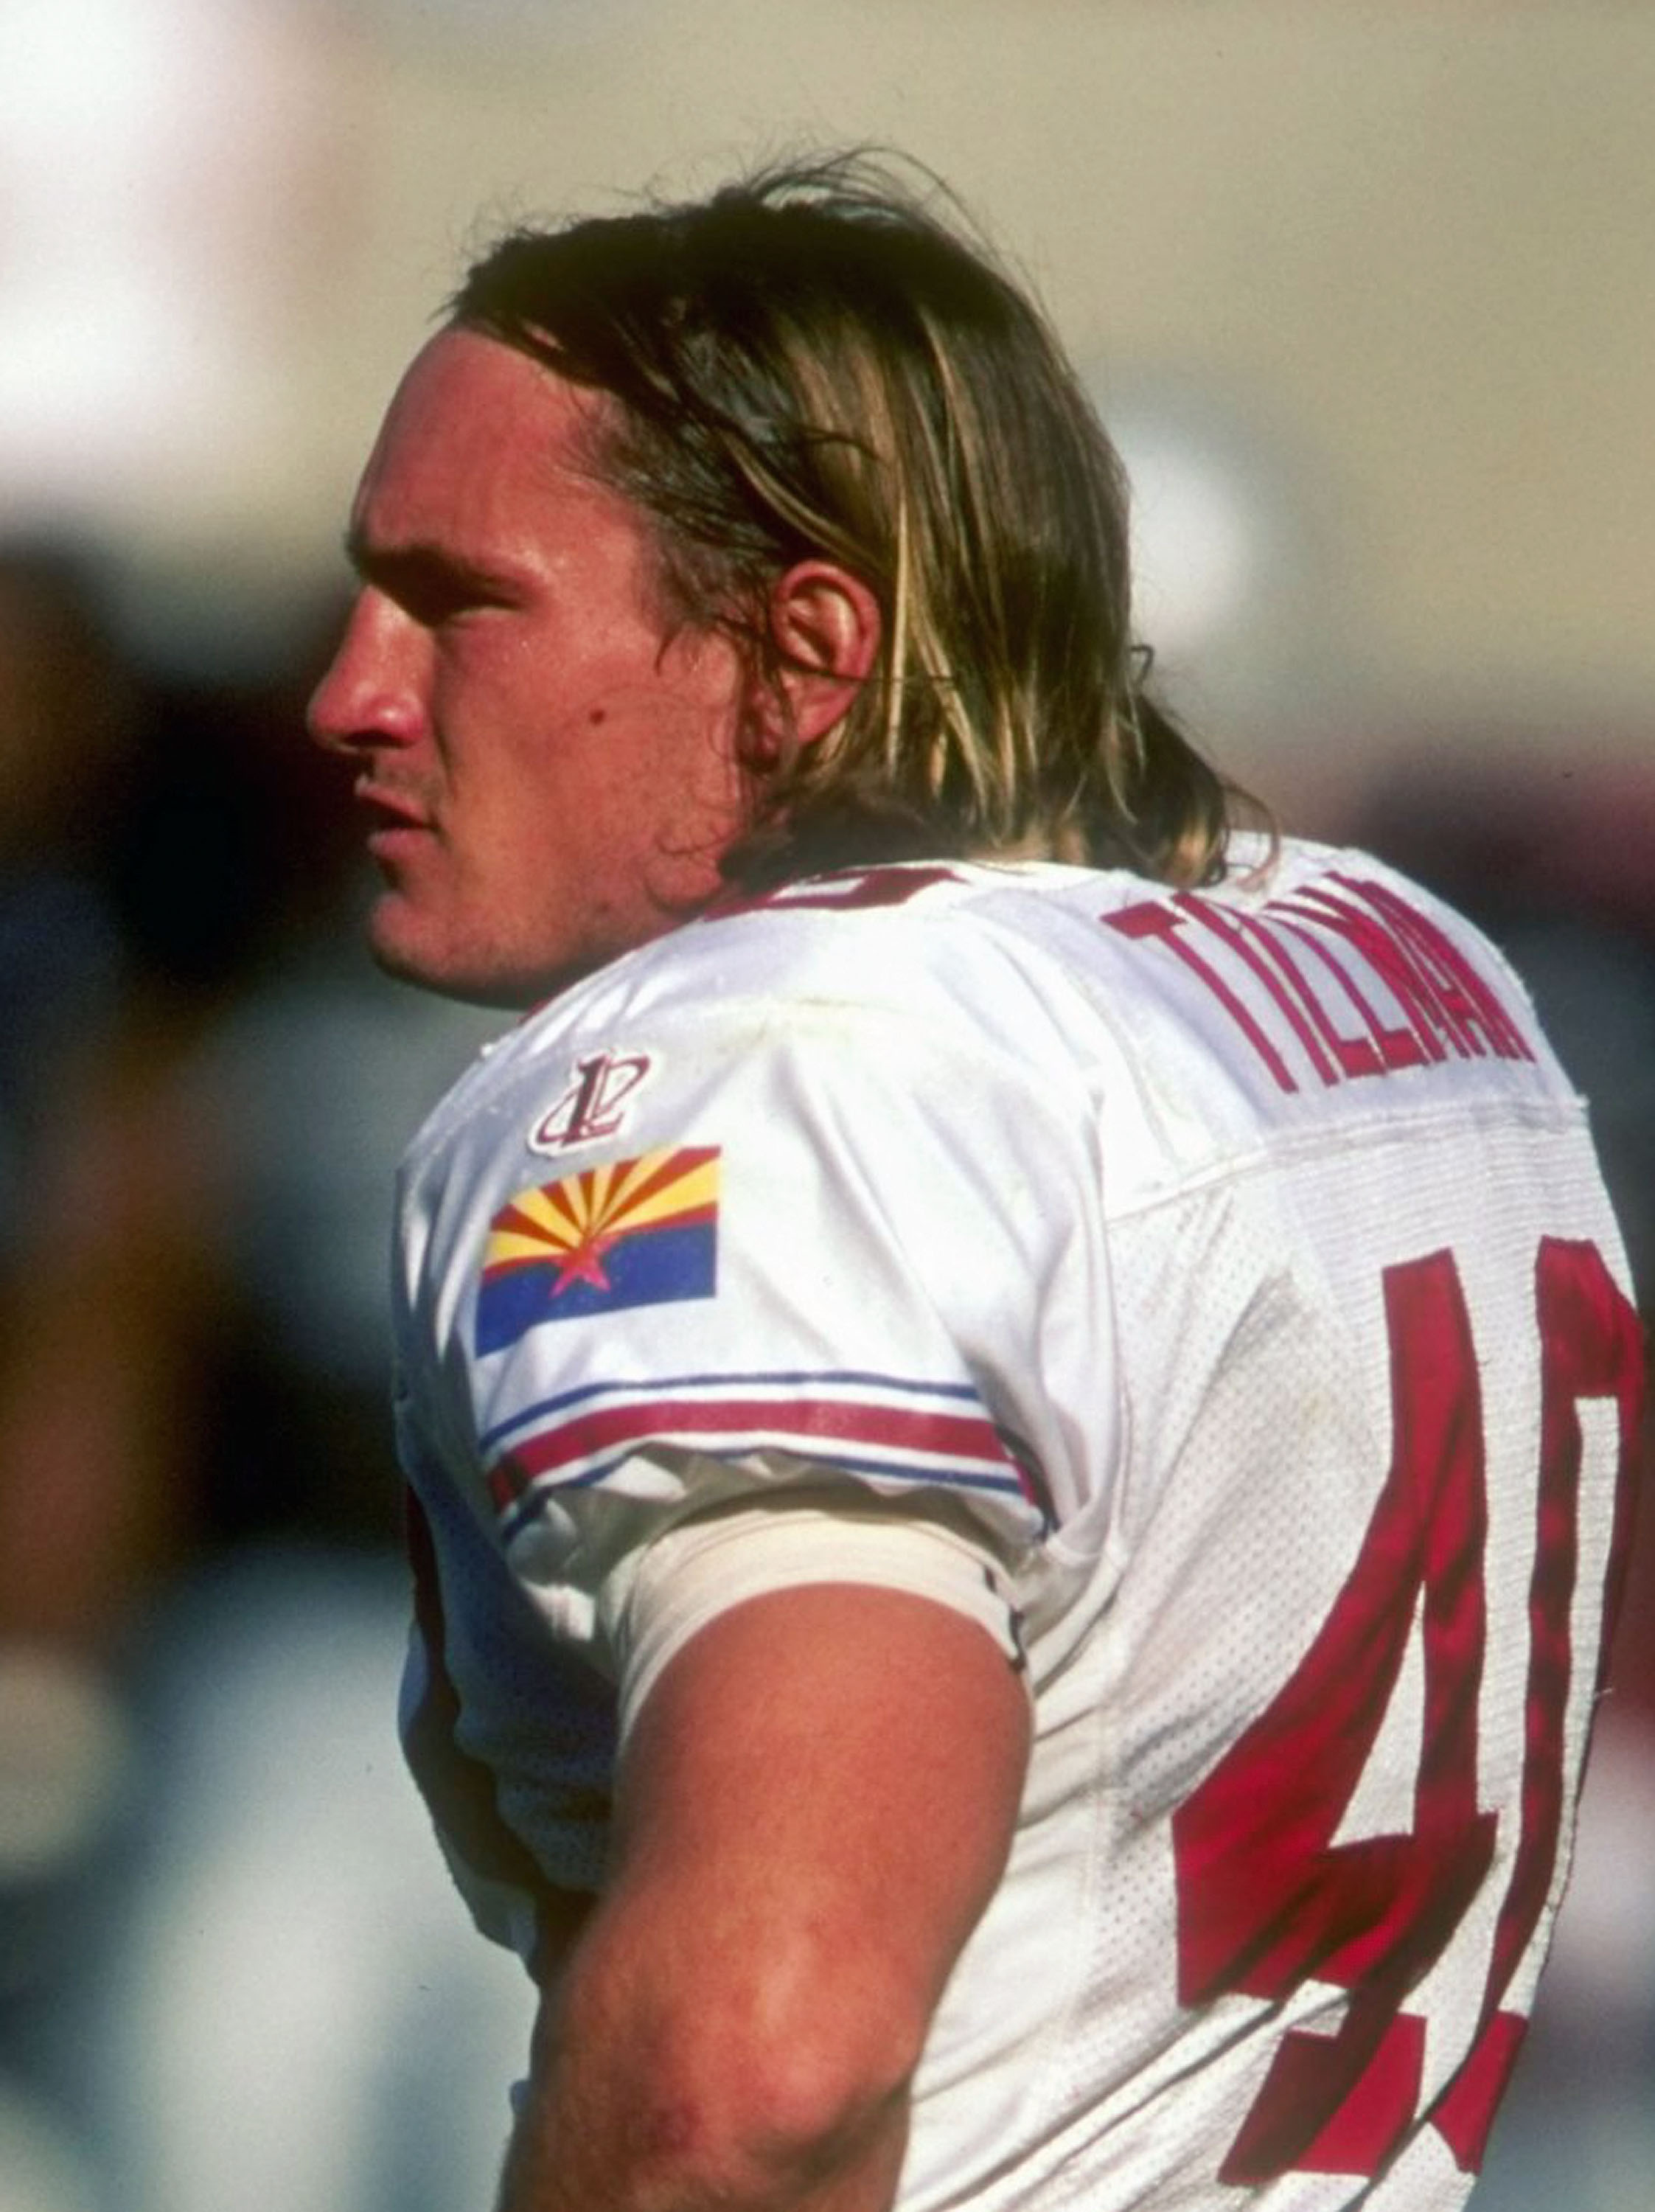 TEMPE, AZ - OCTOBER 4: FILE PHOTO  Safety Pat Tillman #40 of the Arizona Cardinals looks on during a game against the Oakland Raiders at the Sun Devil Stadium October 4 1998 in Tempe, Arizona. Tillman, a U.S. Army Ranger and former Arizona Cardinals stron